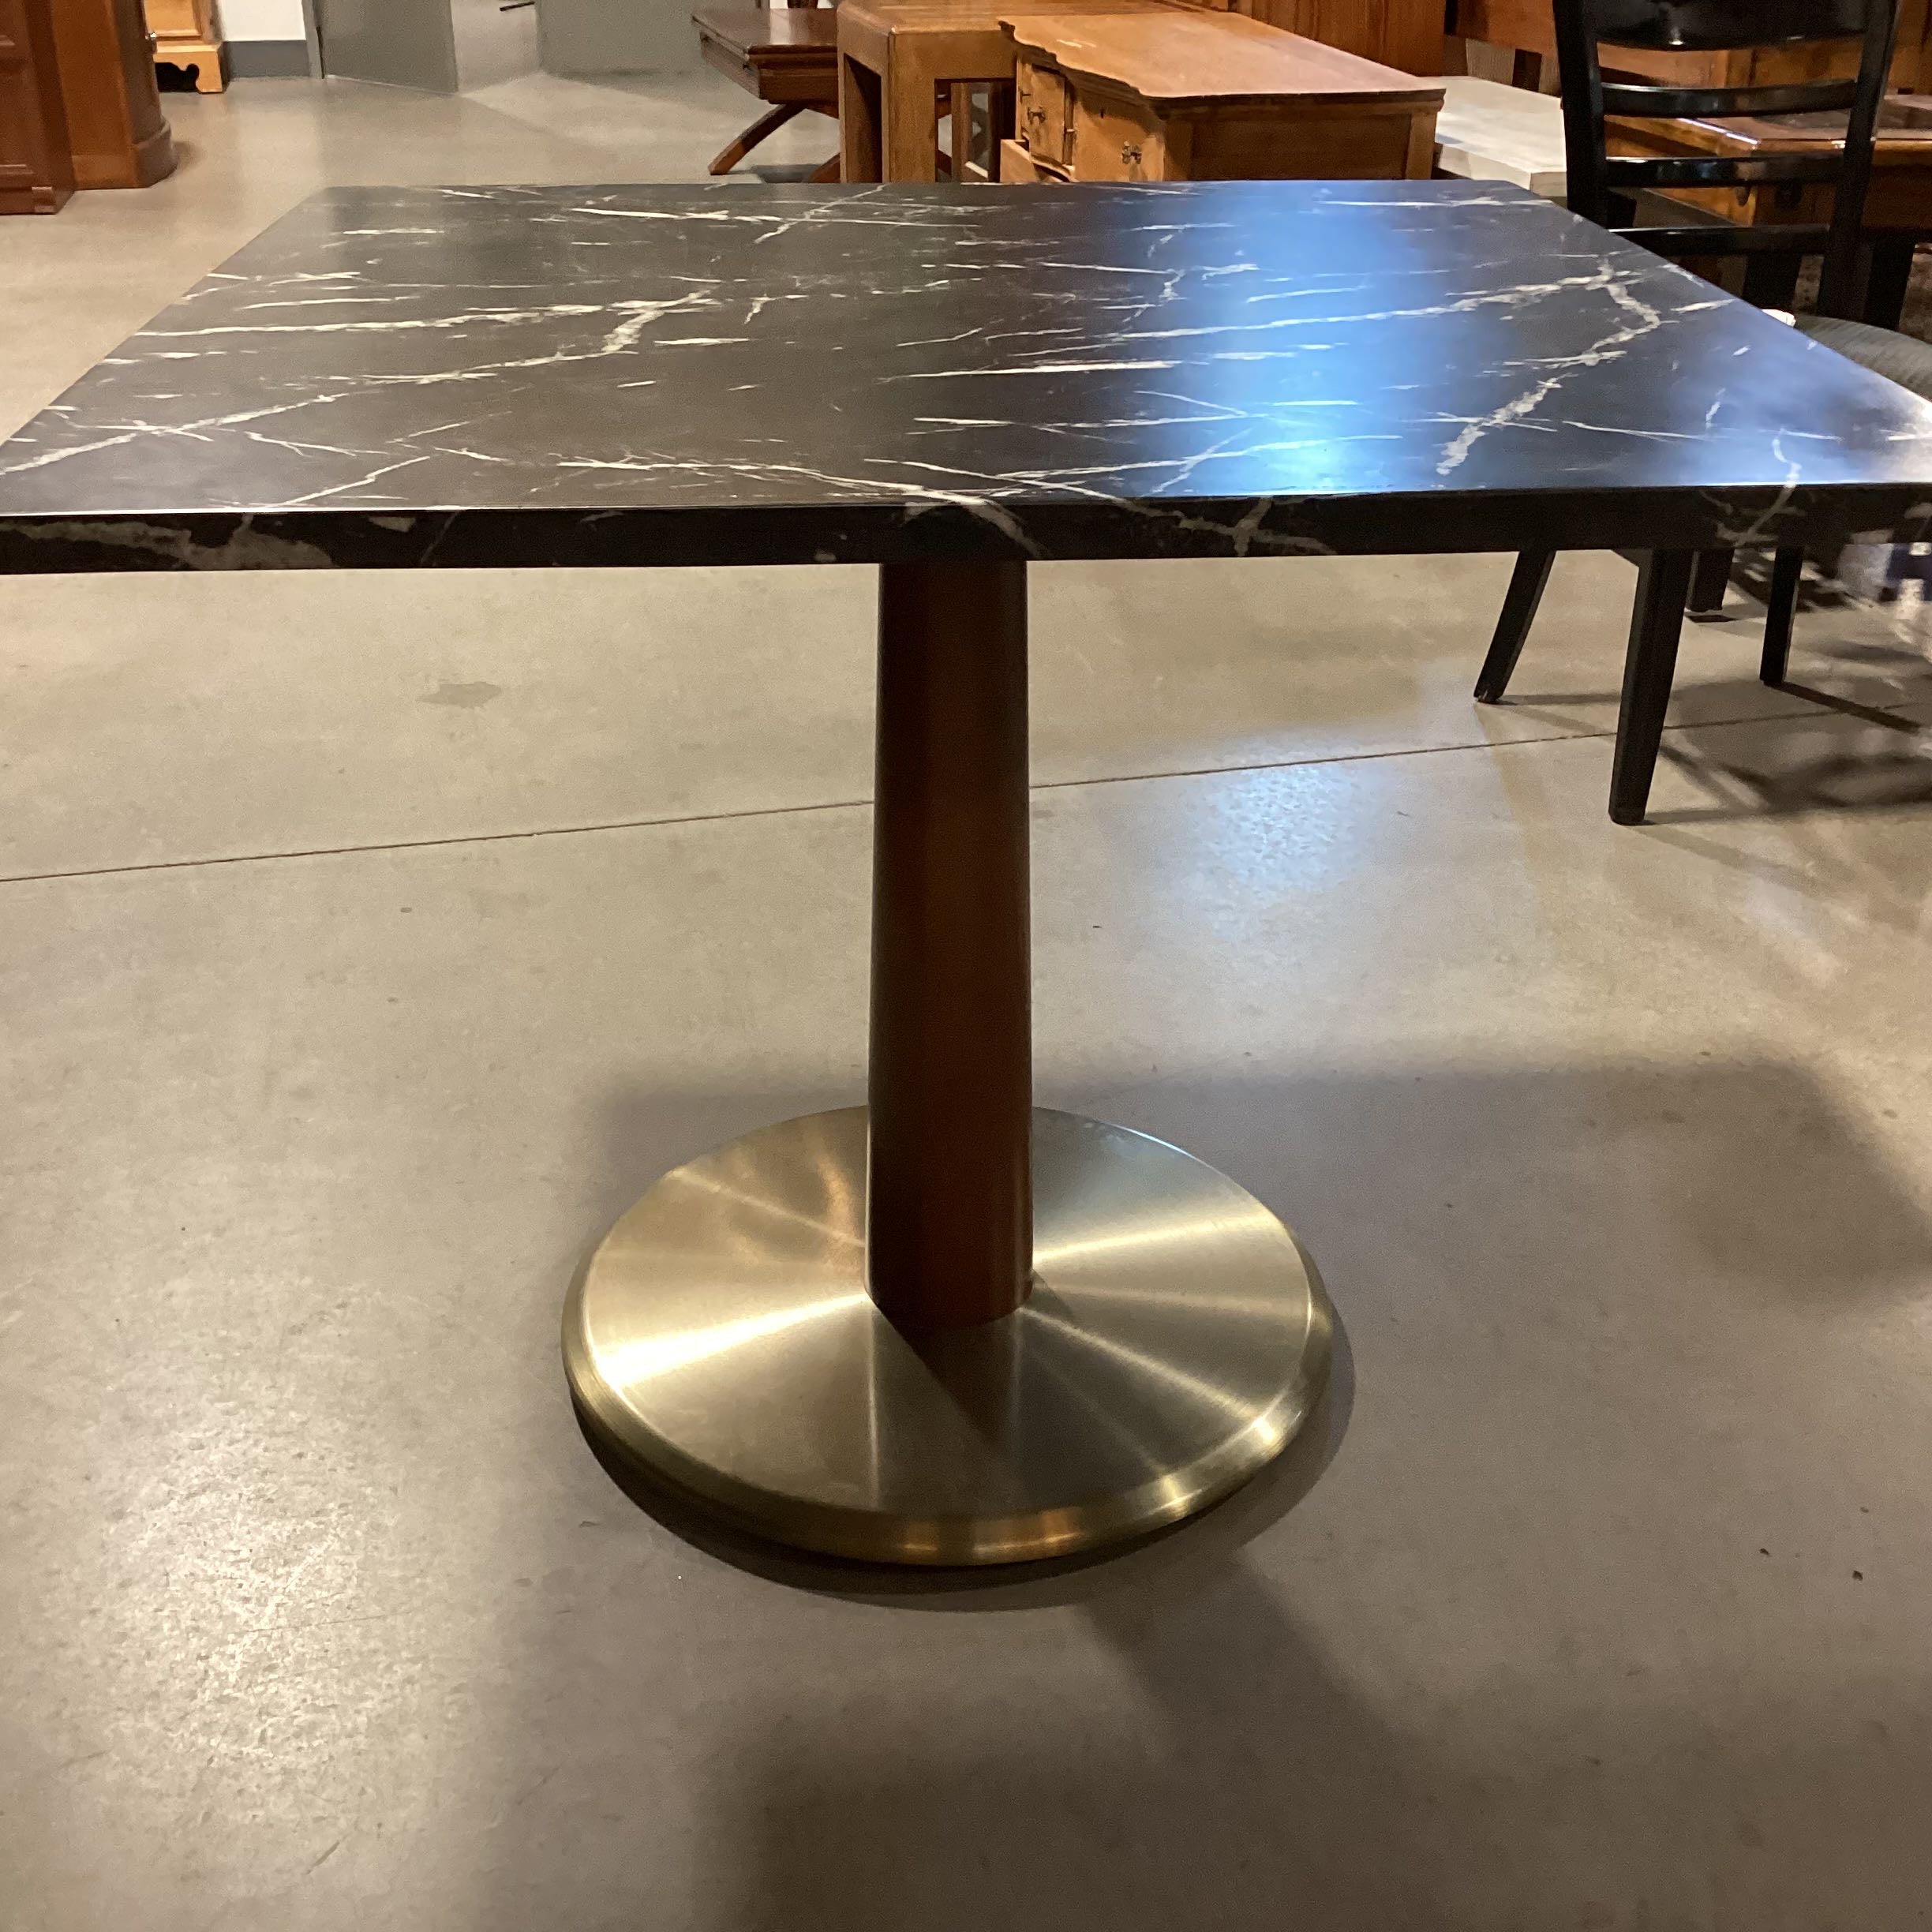 Williams & Sonoma Black Marble with Wood Brass Pedestal Dining Table